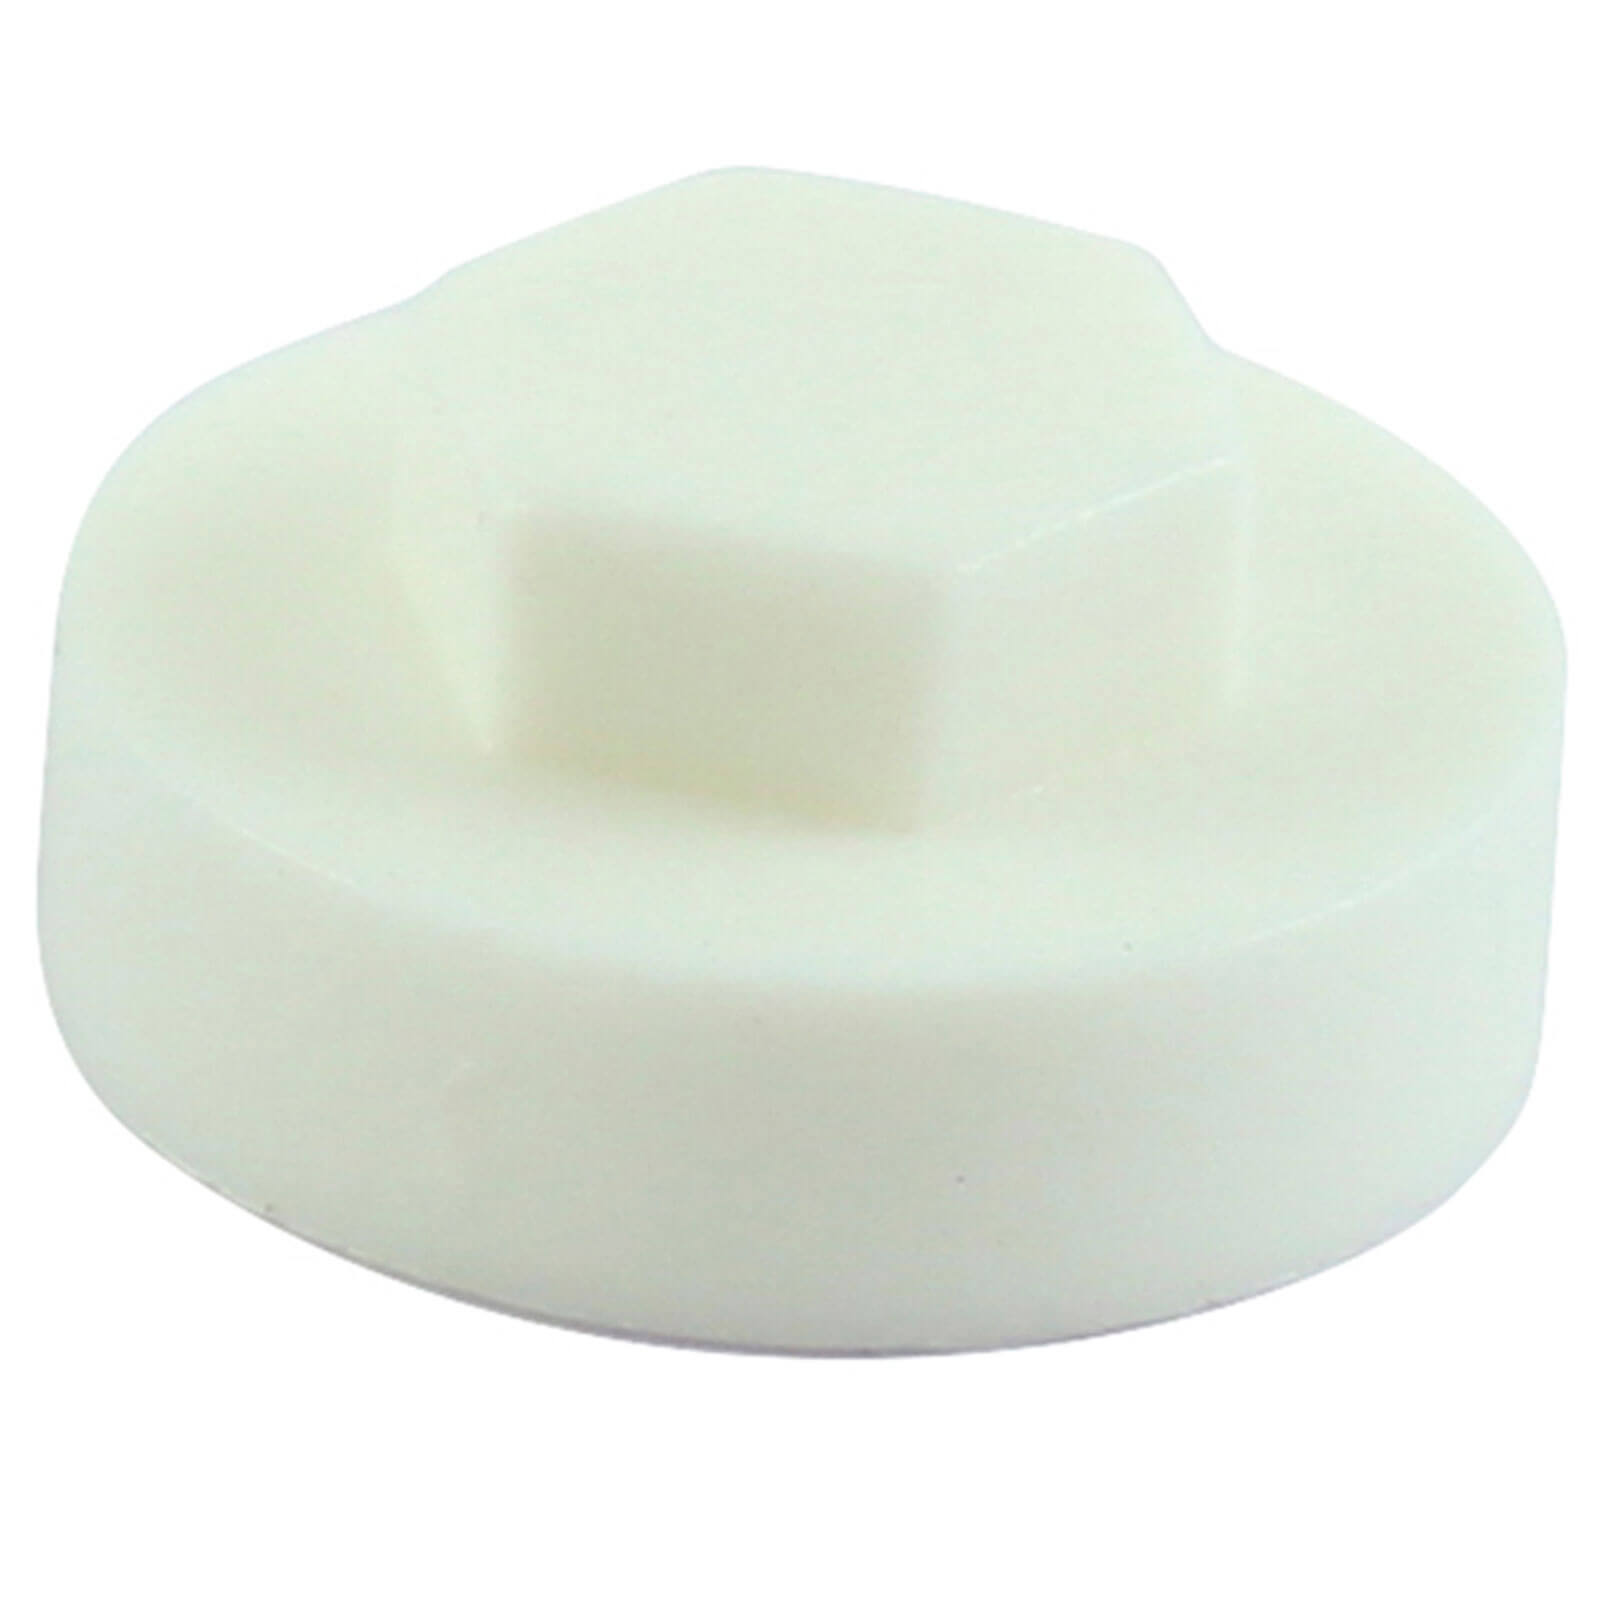 Image of Colour Match Hexagon Screw Cover Cap 5/16" x 16mm White Pack of 1000